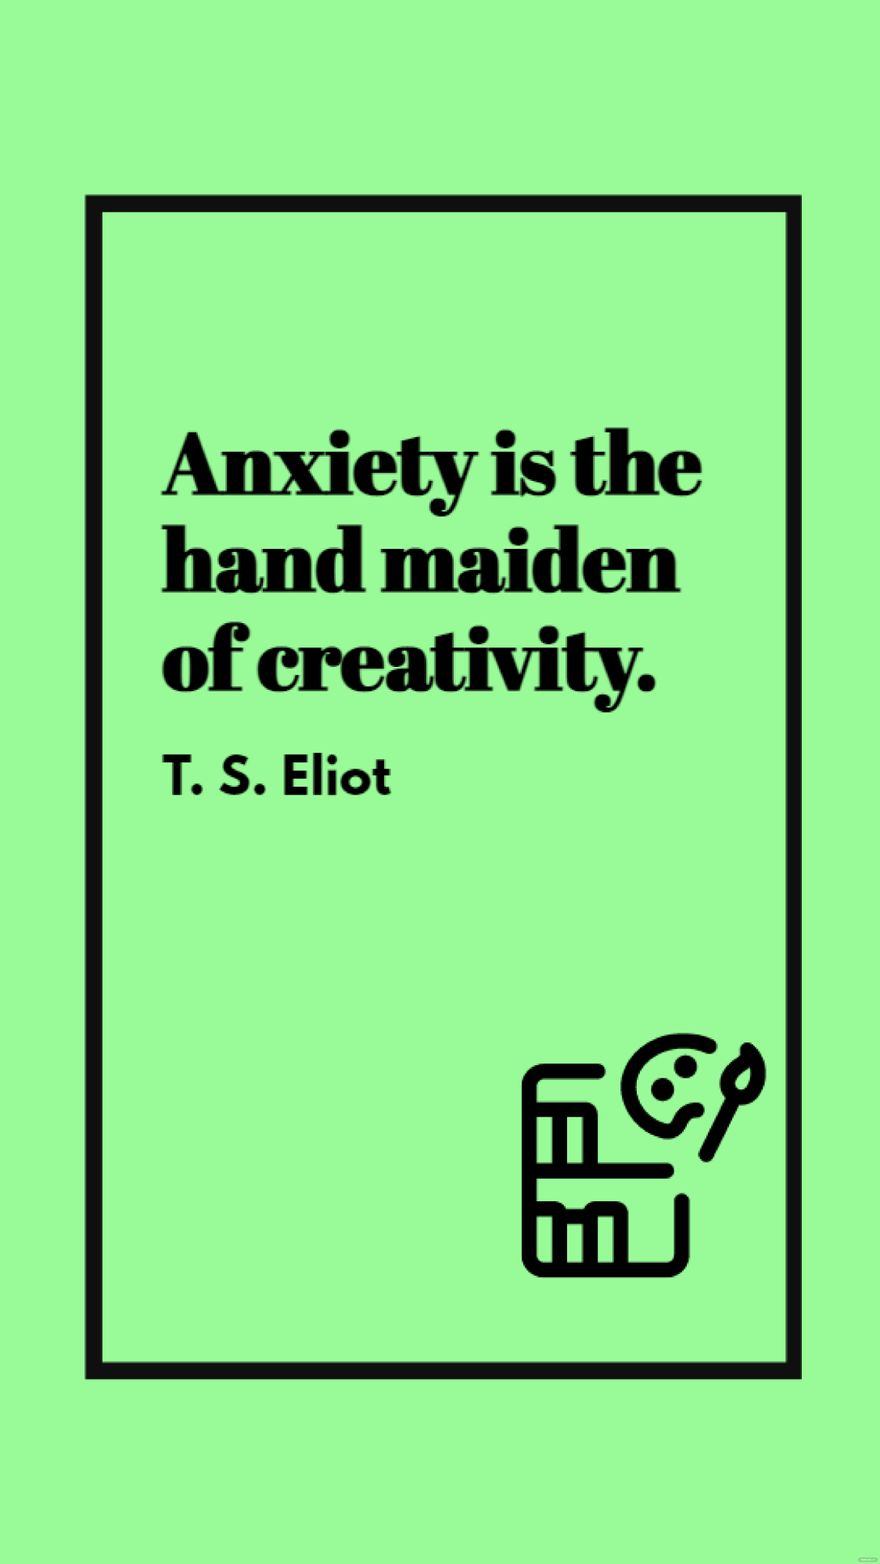 T. S. Eliot - Anxiety is the hand maiden of creativity. in JPG